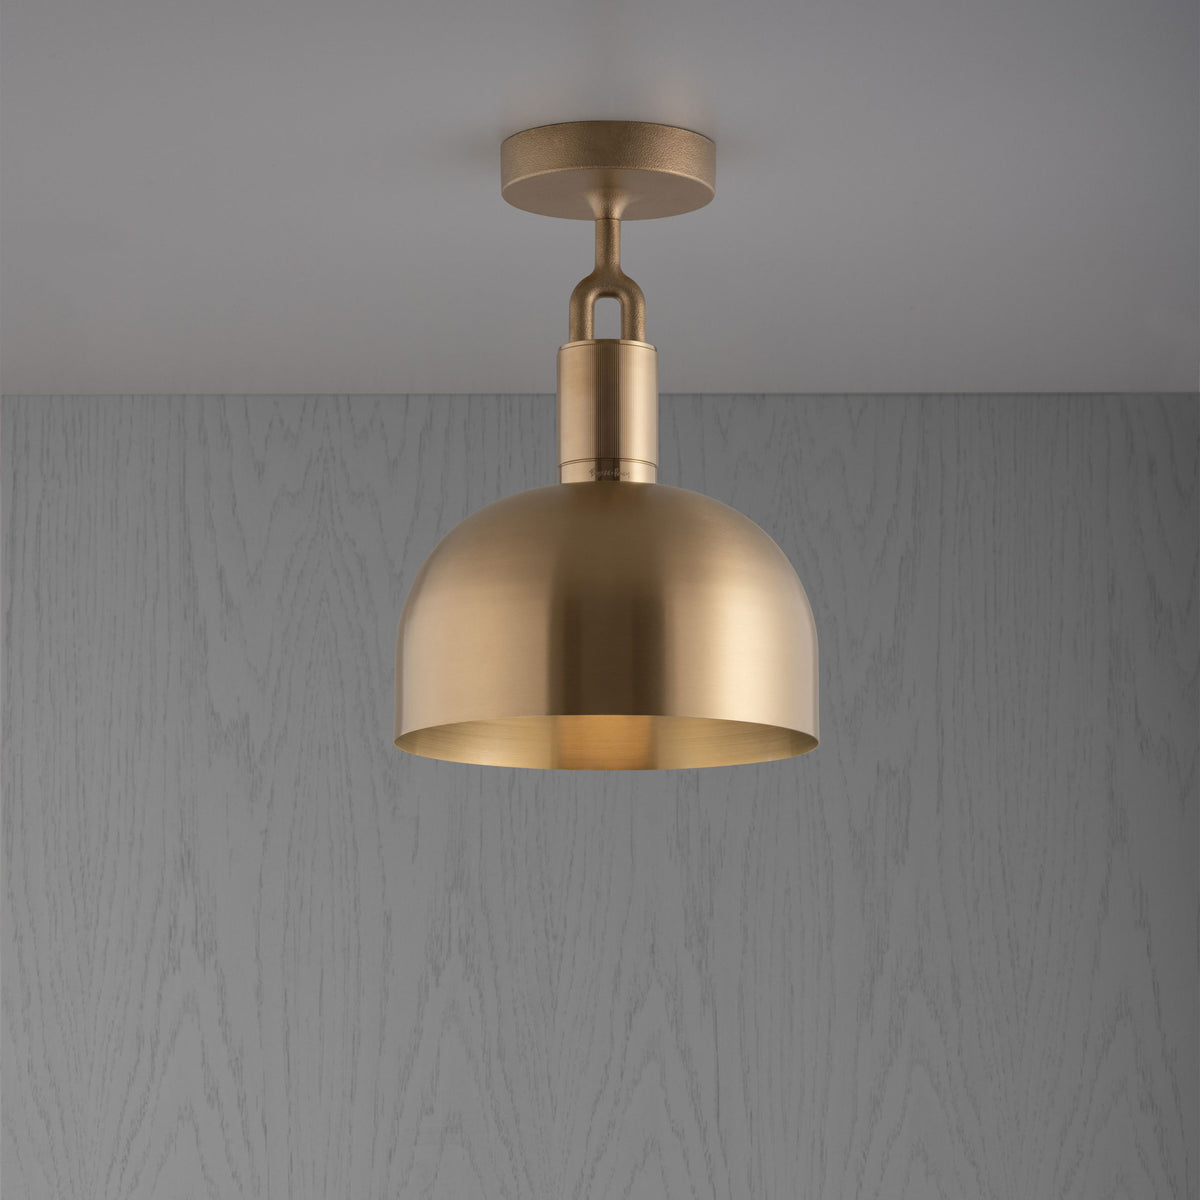 Buster + Punch - NFC-813203 - Forked Ceiling - Shade - Forked - Brass 